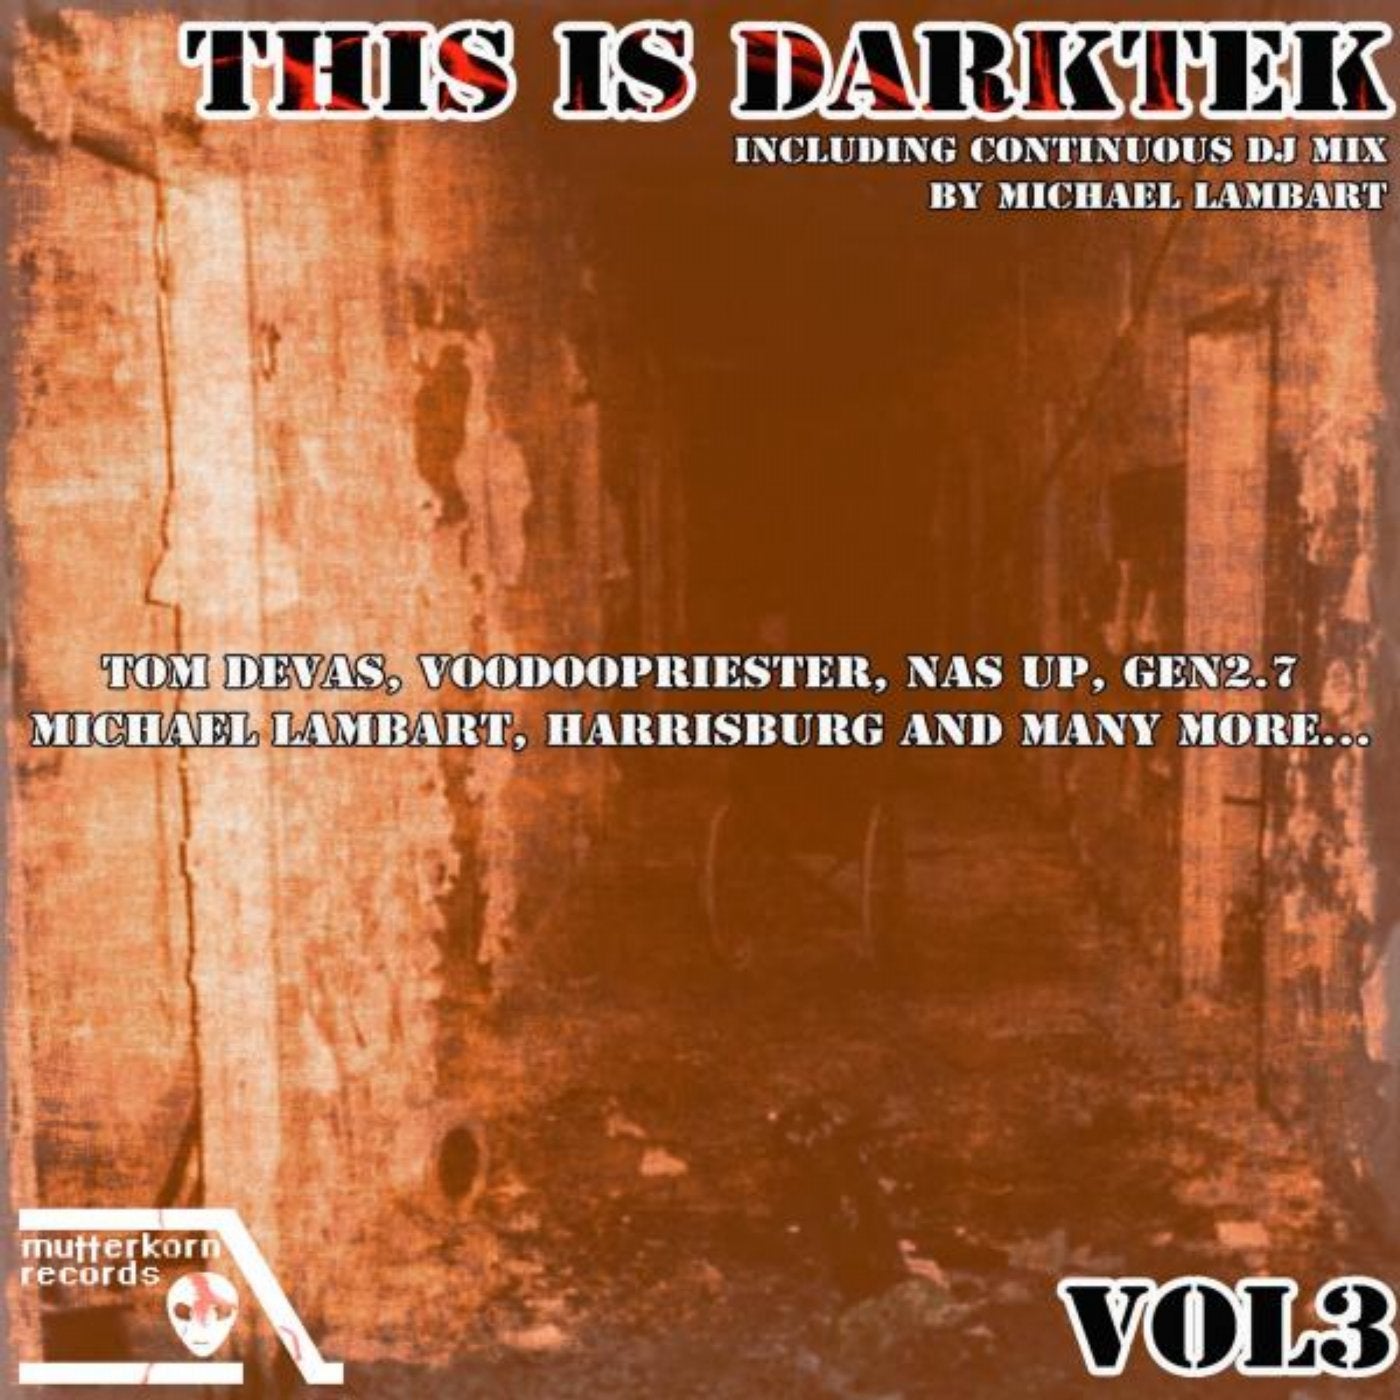 This Is Darktek, Vol. 3 (Including Continuous Mix by Michael Lambart)